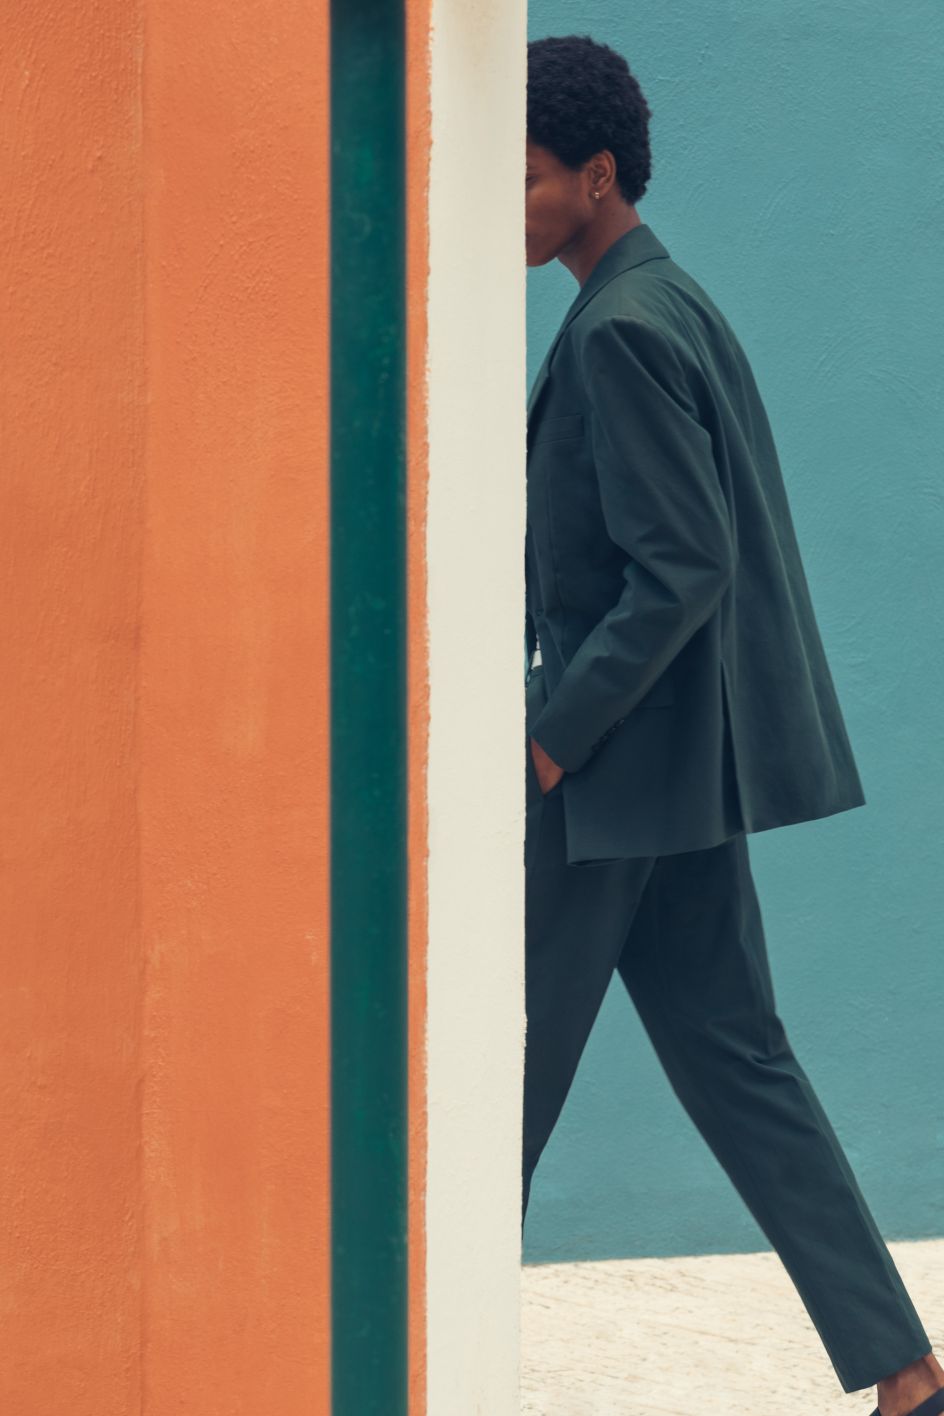 Rafael wears a suit by Acne Studios and a belt by Givenchy. Photography by Romain Laprade for Kinfolk Magazine